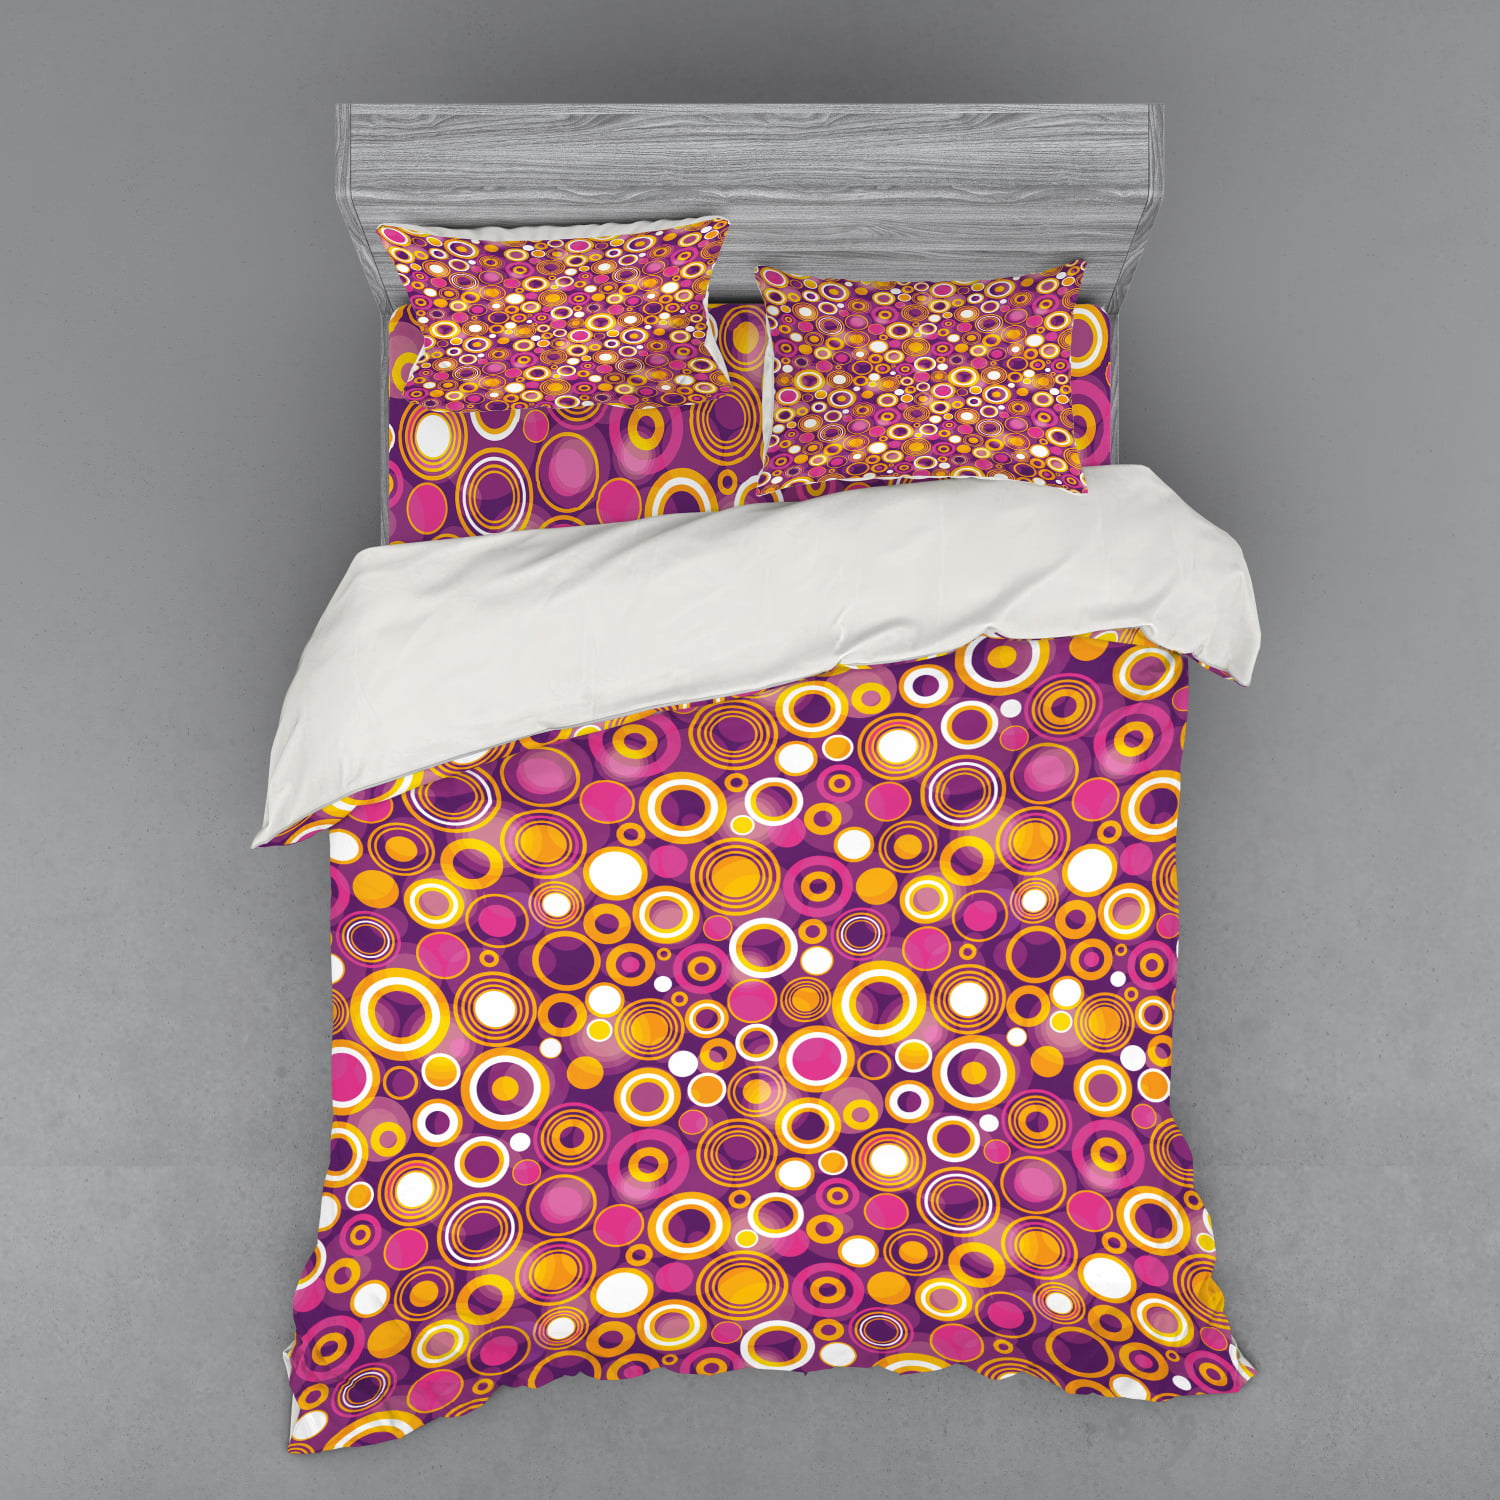 Geometric Duvet Cover Set, Retro Style 70s Like Vintage Circles and Rounds Water Drops Like